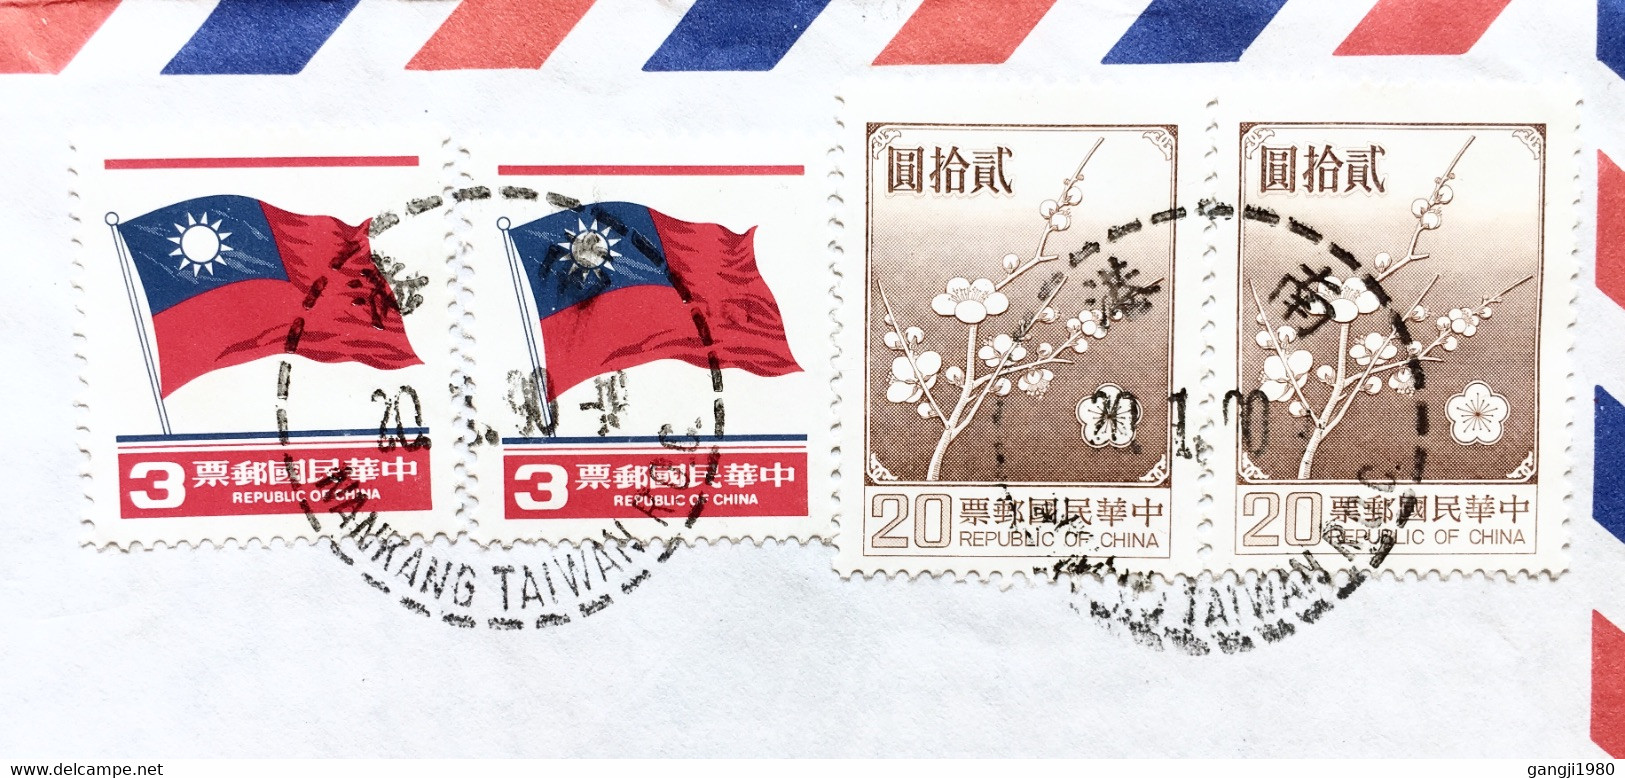 CHINA TAIWAN TO USA 1990, USED COVER, VIGNETTE EXPRESS “AIRMAIL” LABEL, NANKANG CITY CANCELLATION, FLAG, FLOWER, PLANT. - Storia Postale